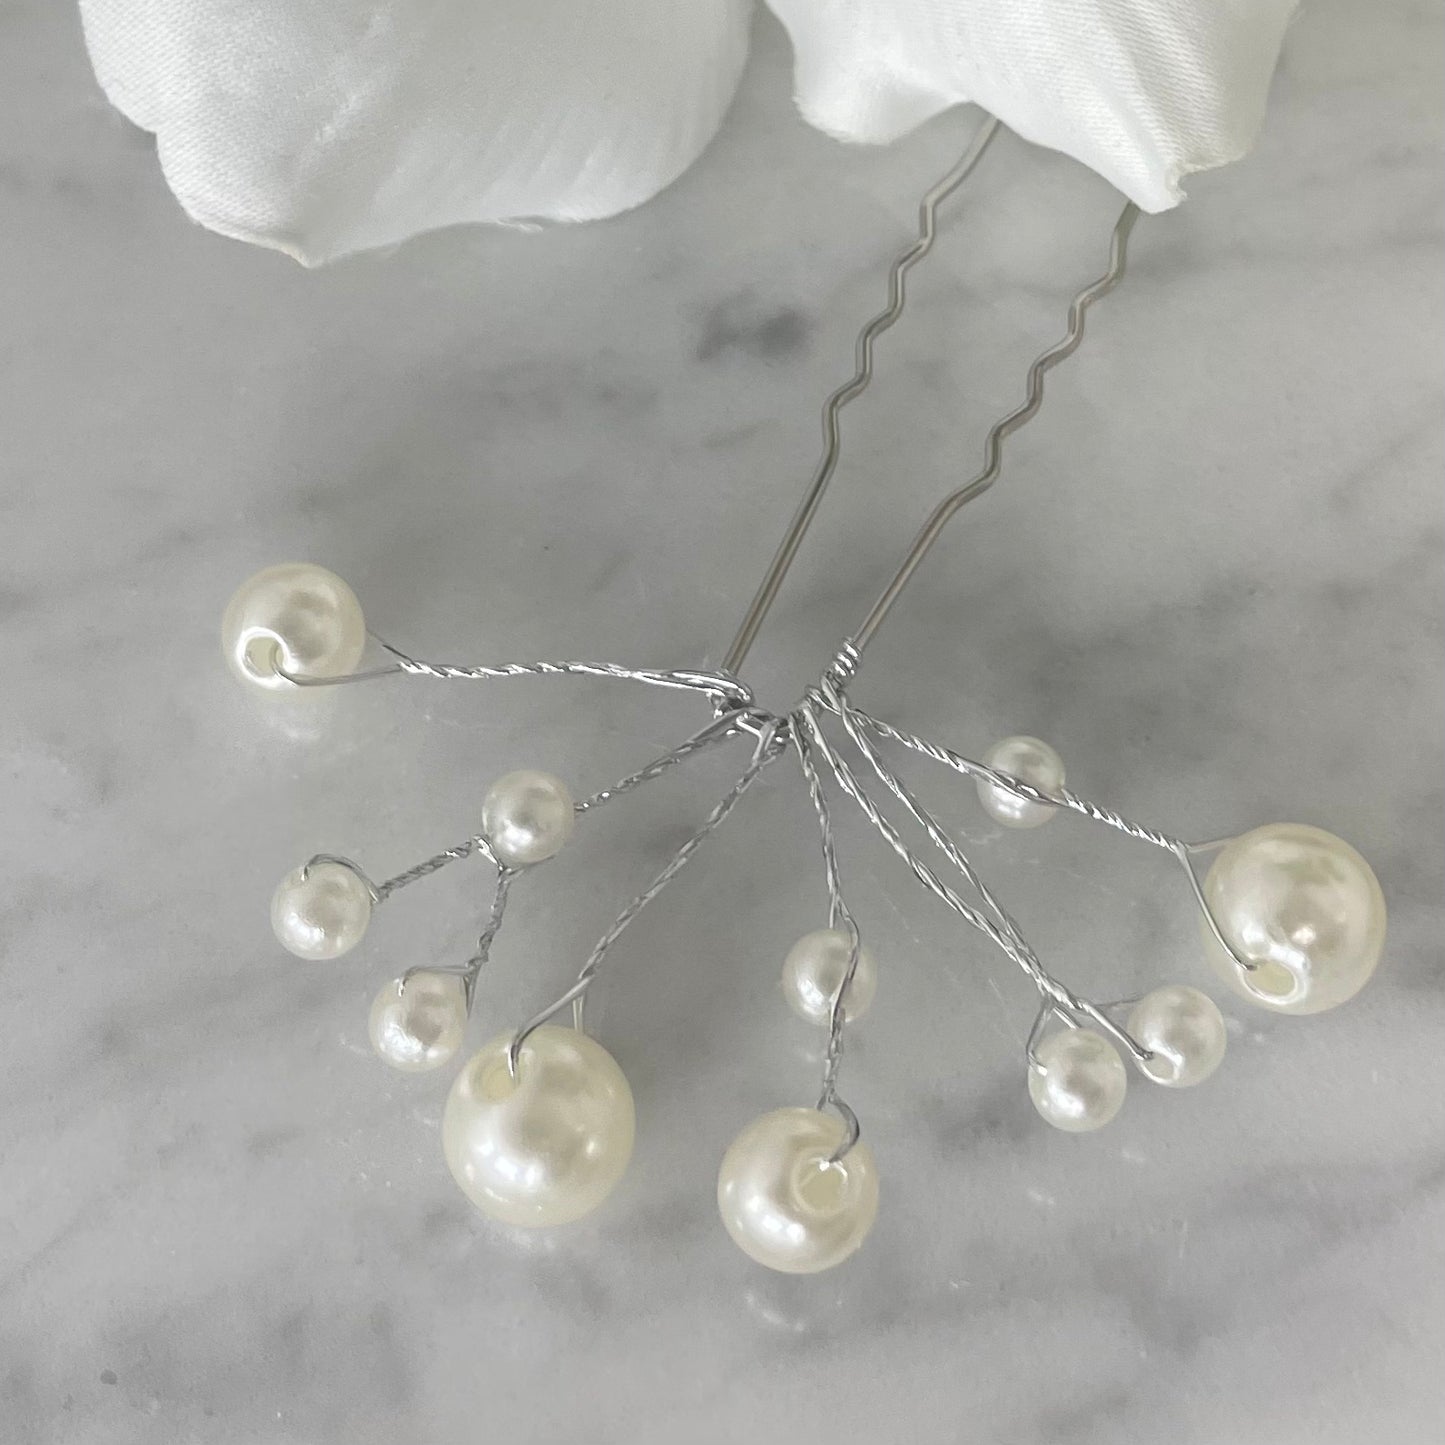 Diamantés and pearl hairpins